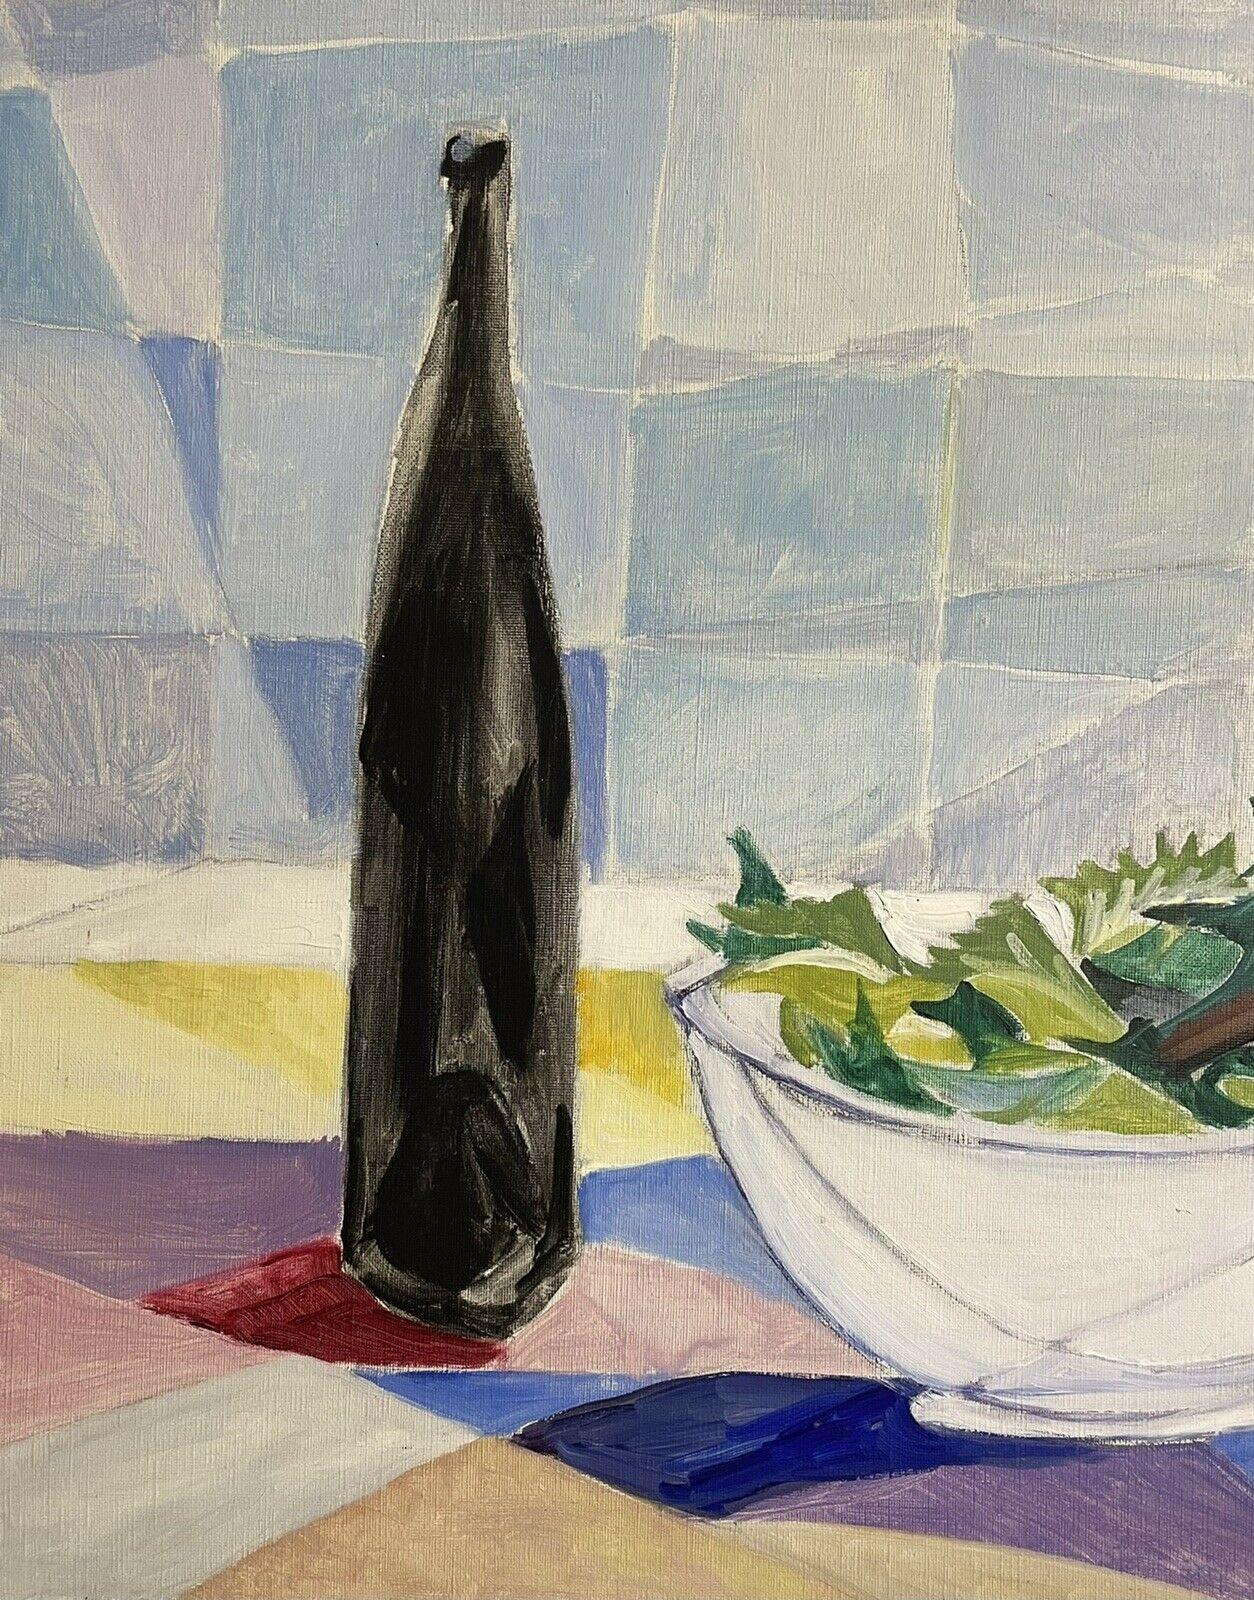 LARGE 1970'S FRENCH CUBIST STILL LIFE OIL PAINTING - TABLE WITH FOOD & WINE - Cubist Painting by Unknown